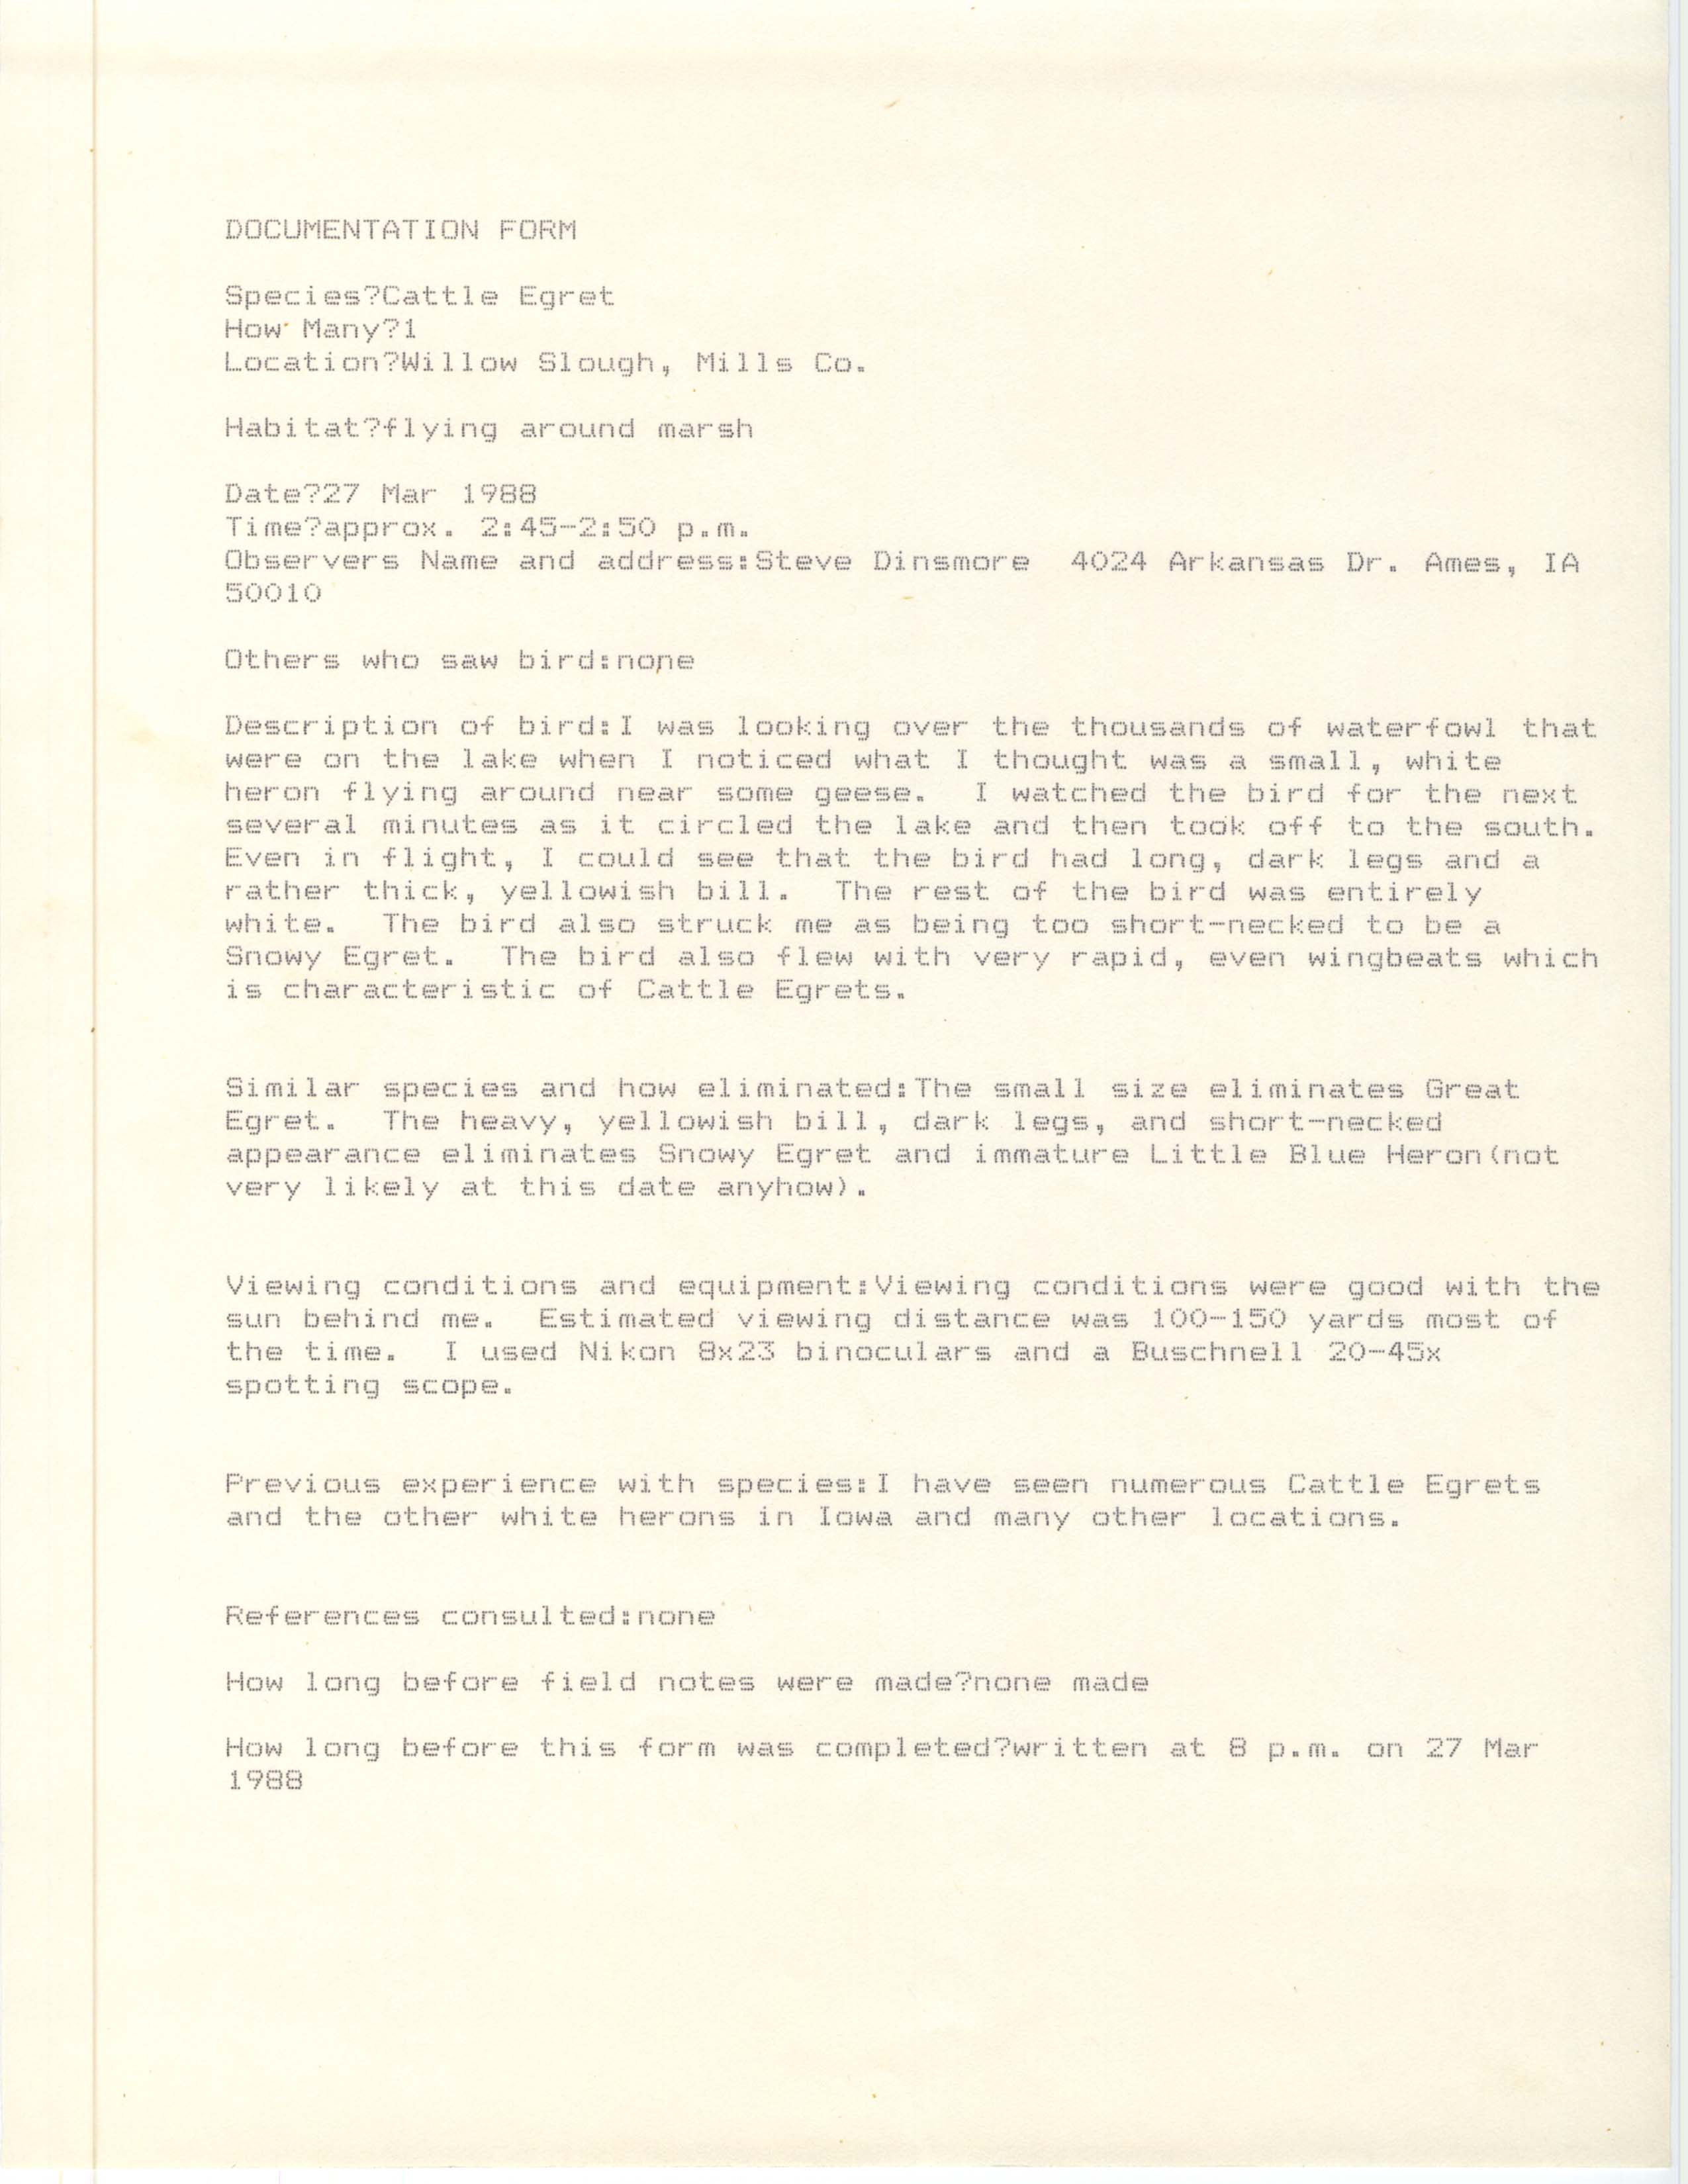 Rare bird documentation form for Cattle Egret at Willow Slough, 1988